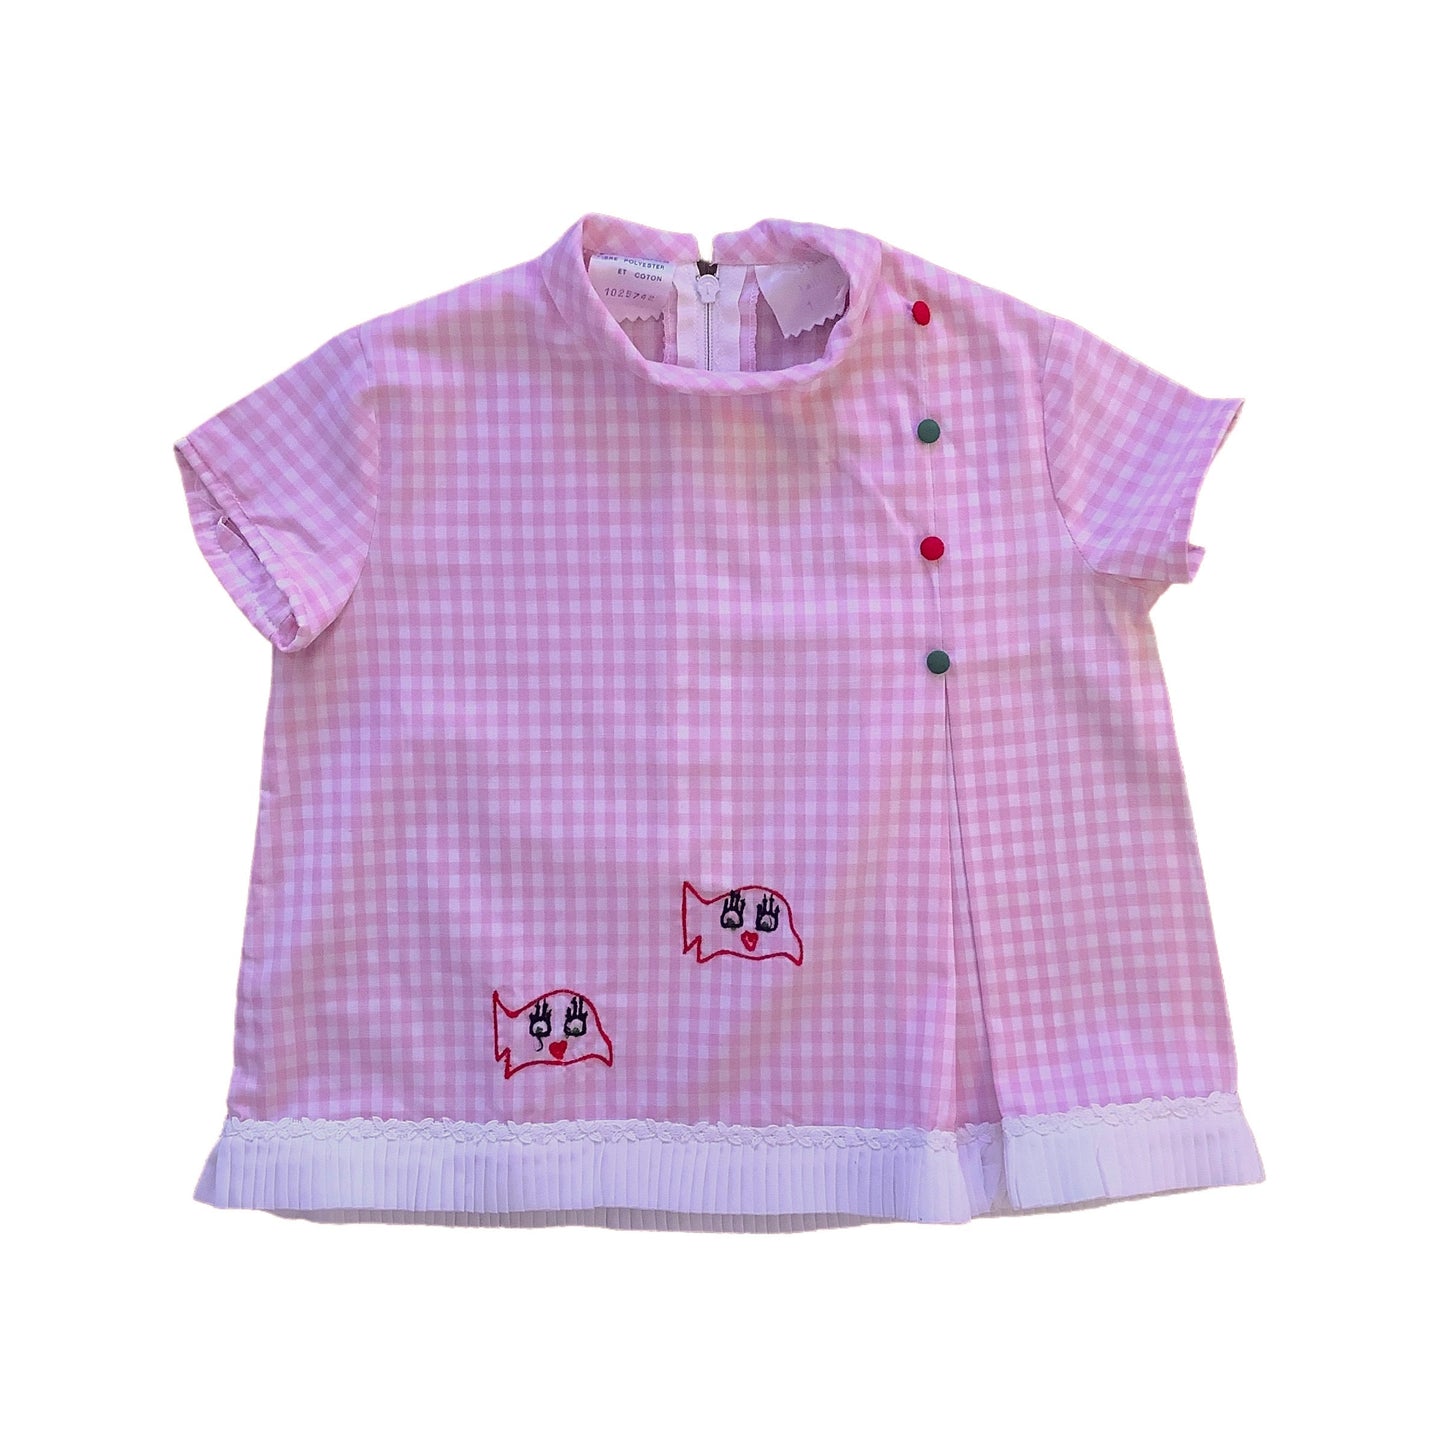 1960's Pink Gingham Top / Dress / 6-9M